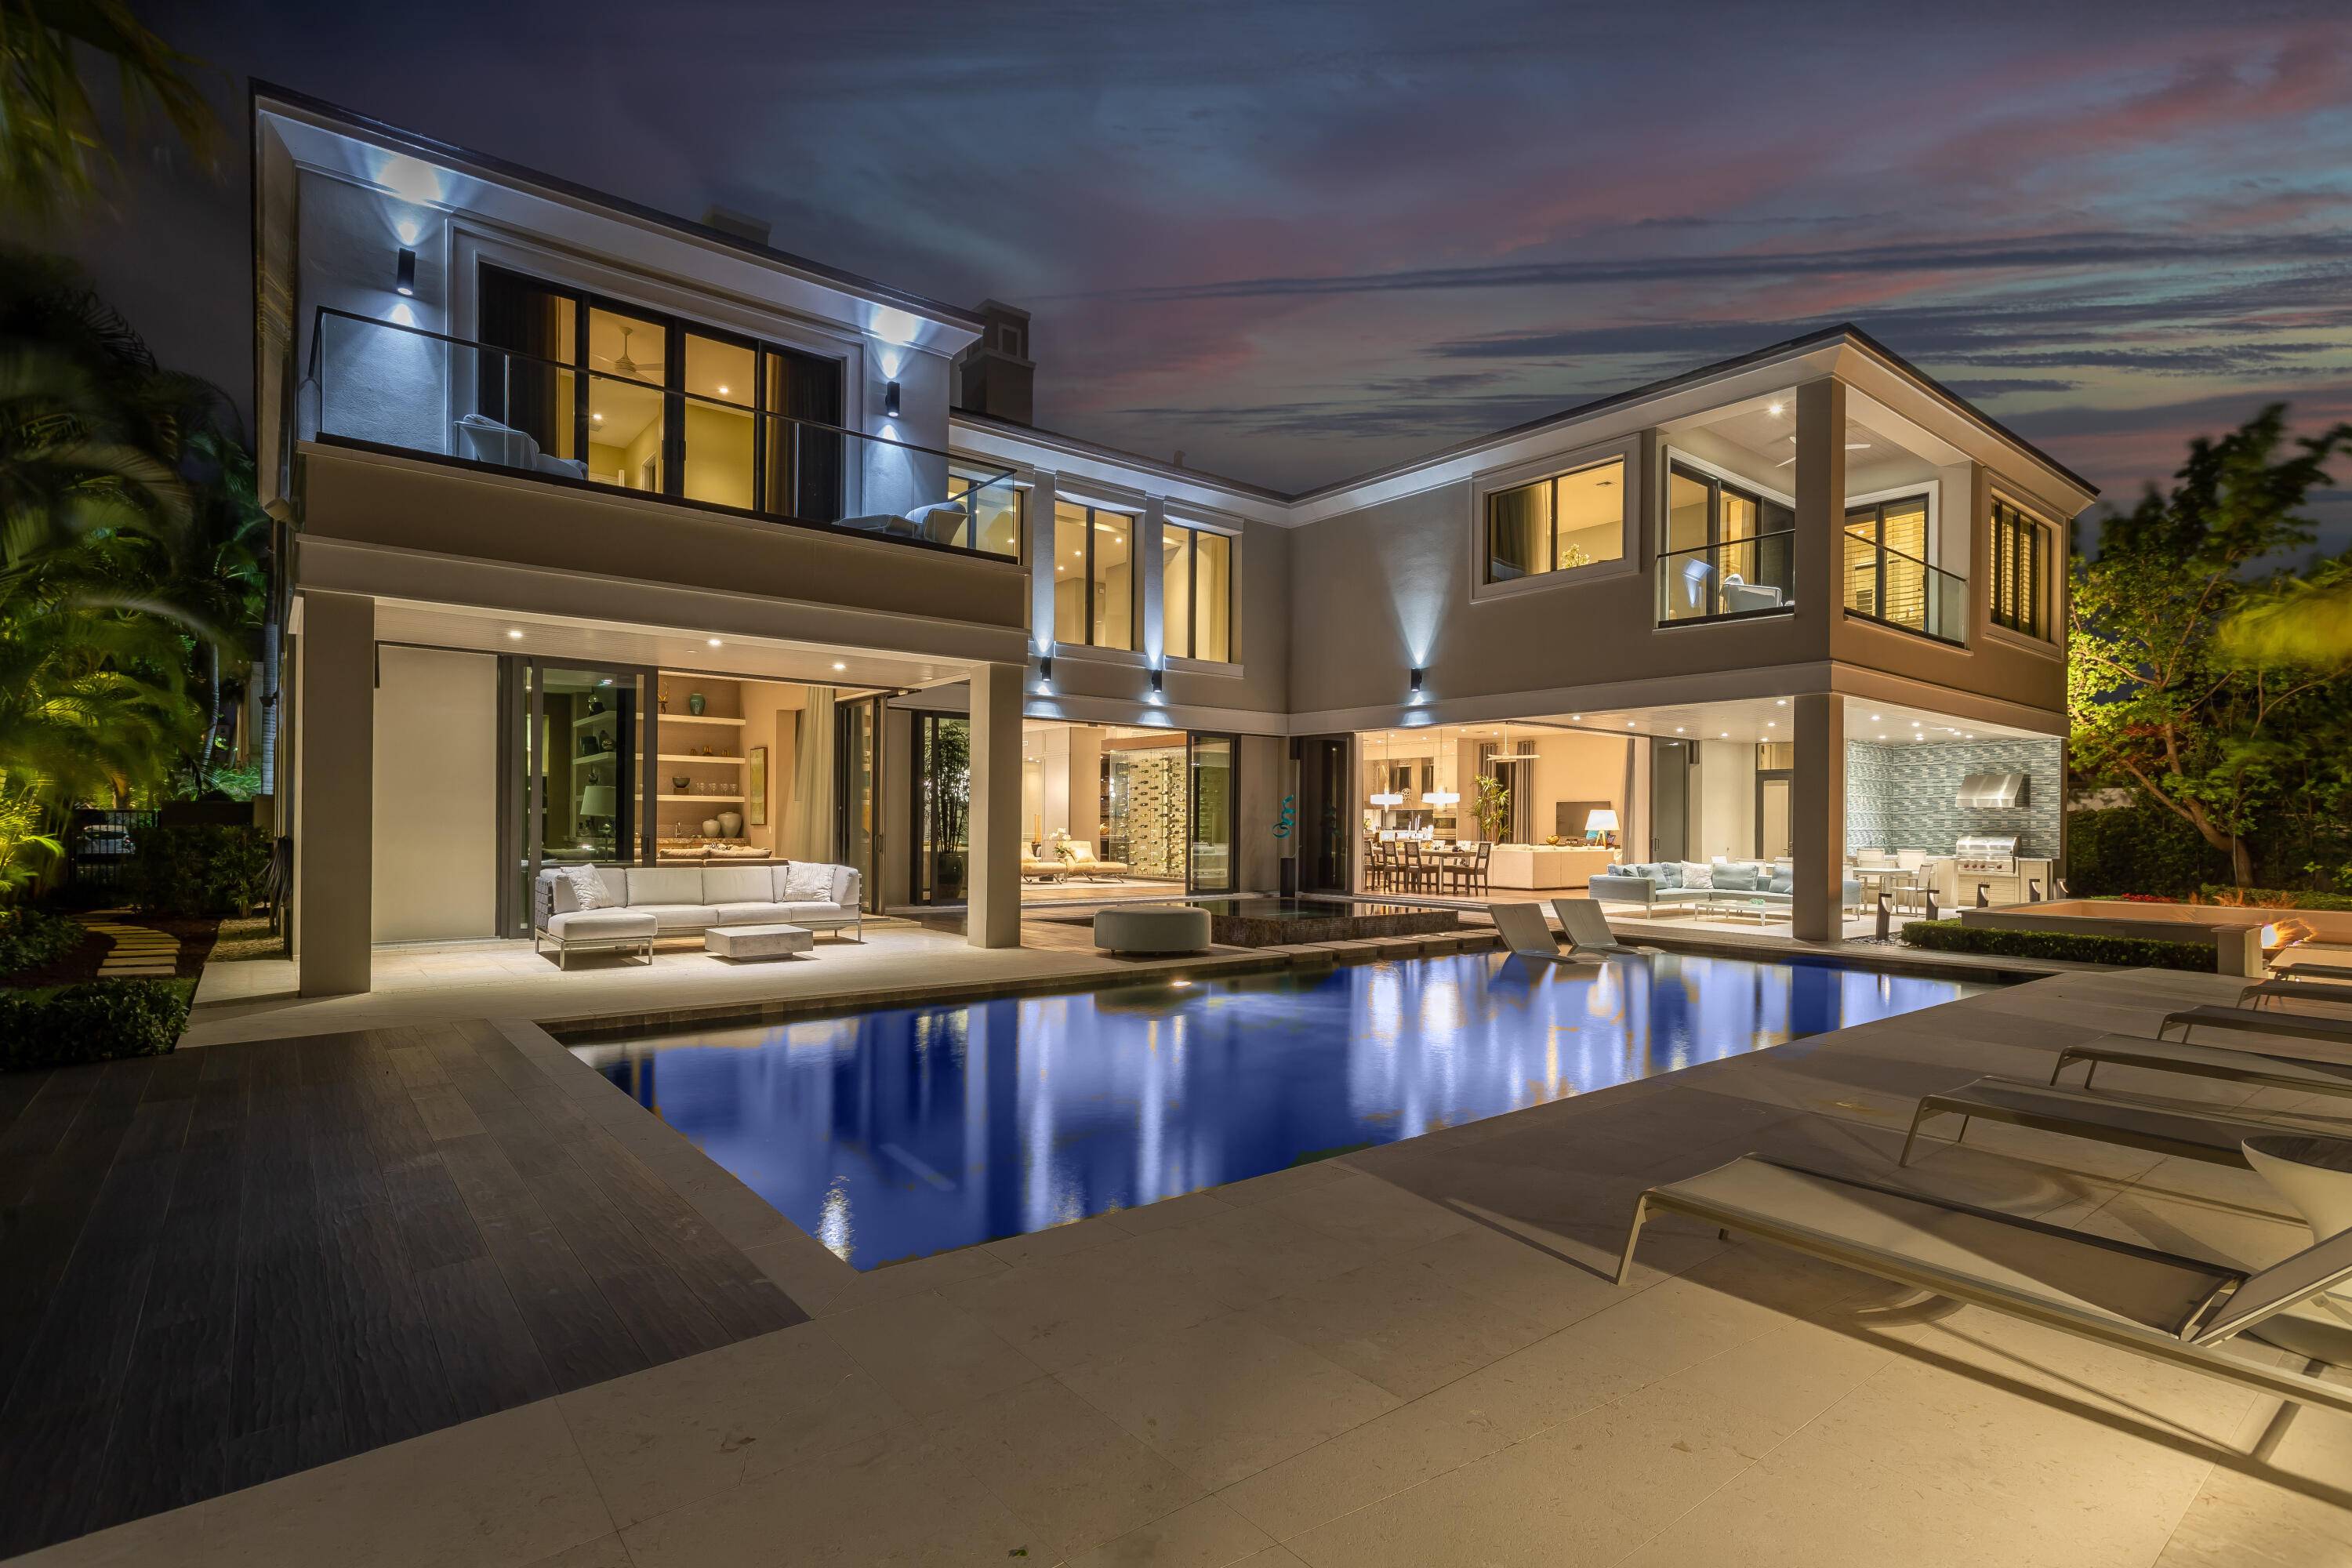 Transitional contemporary two story deep water waterfront residence features Intracoastal access and 24 7 gate and water patrol security with private roads.